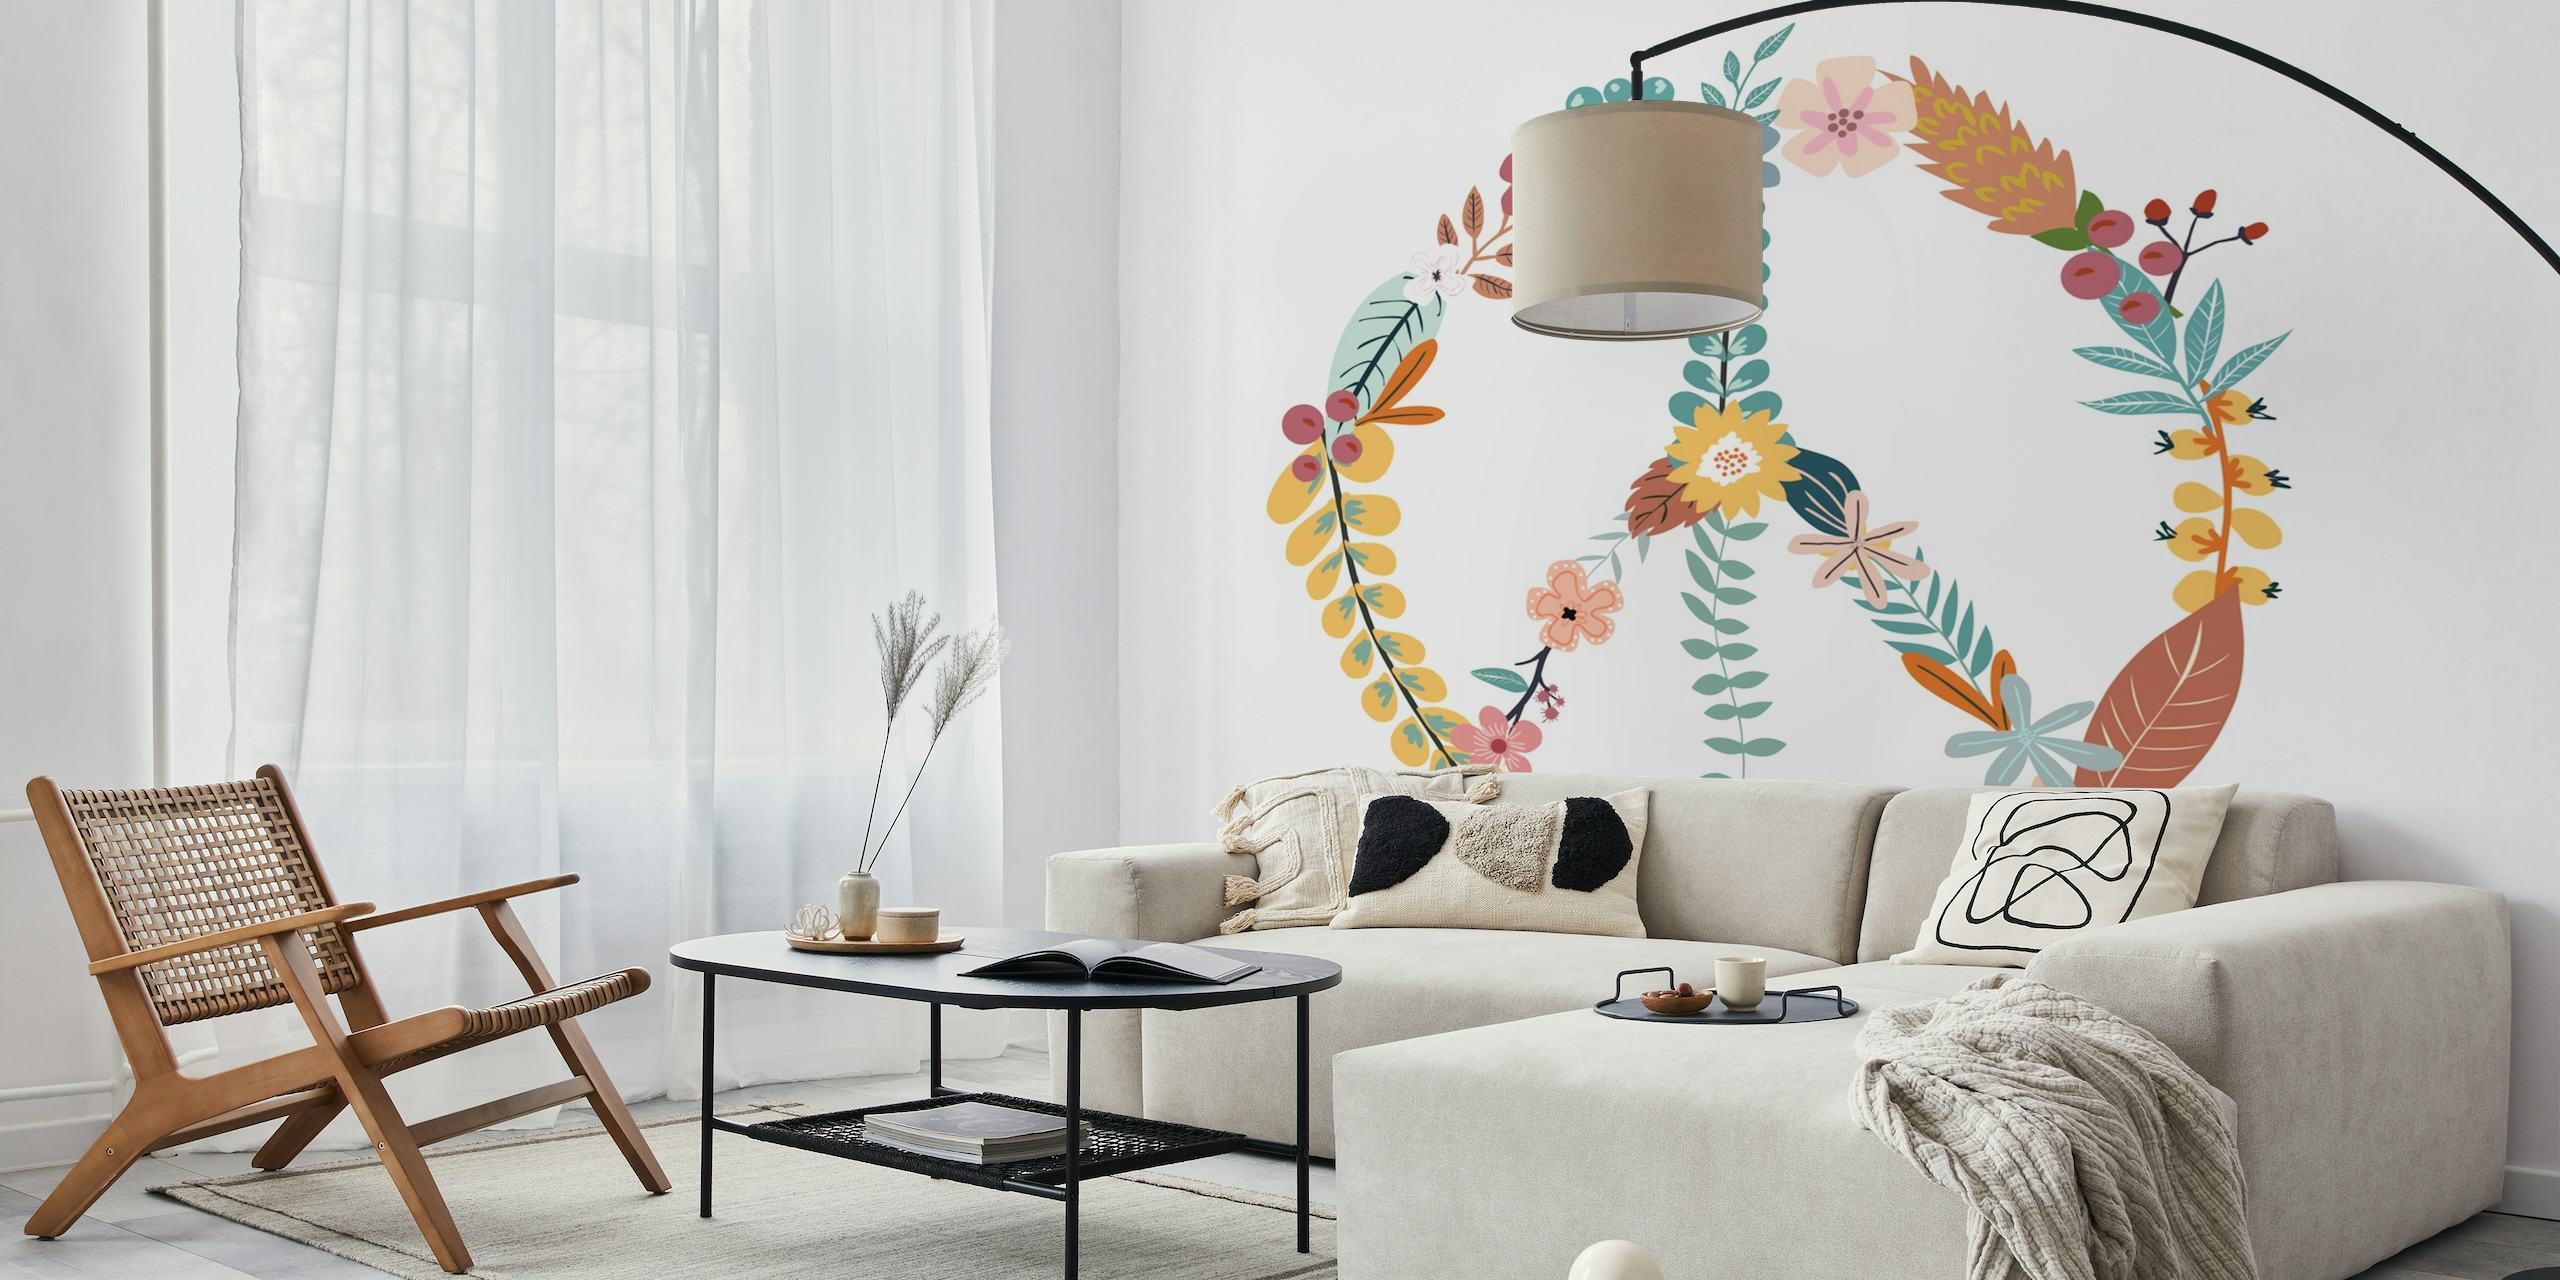 Flower Power wall mural with a circle of colorful hand-painted flowers and leaves